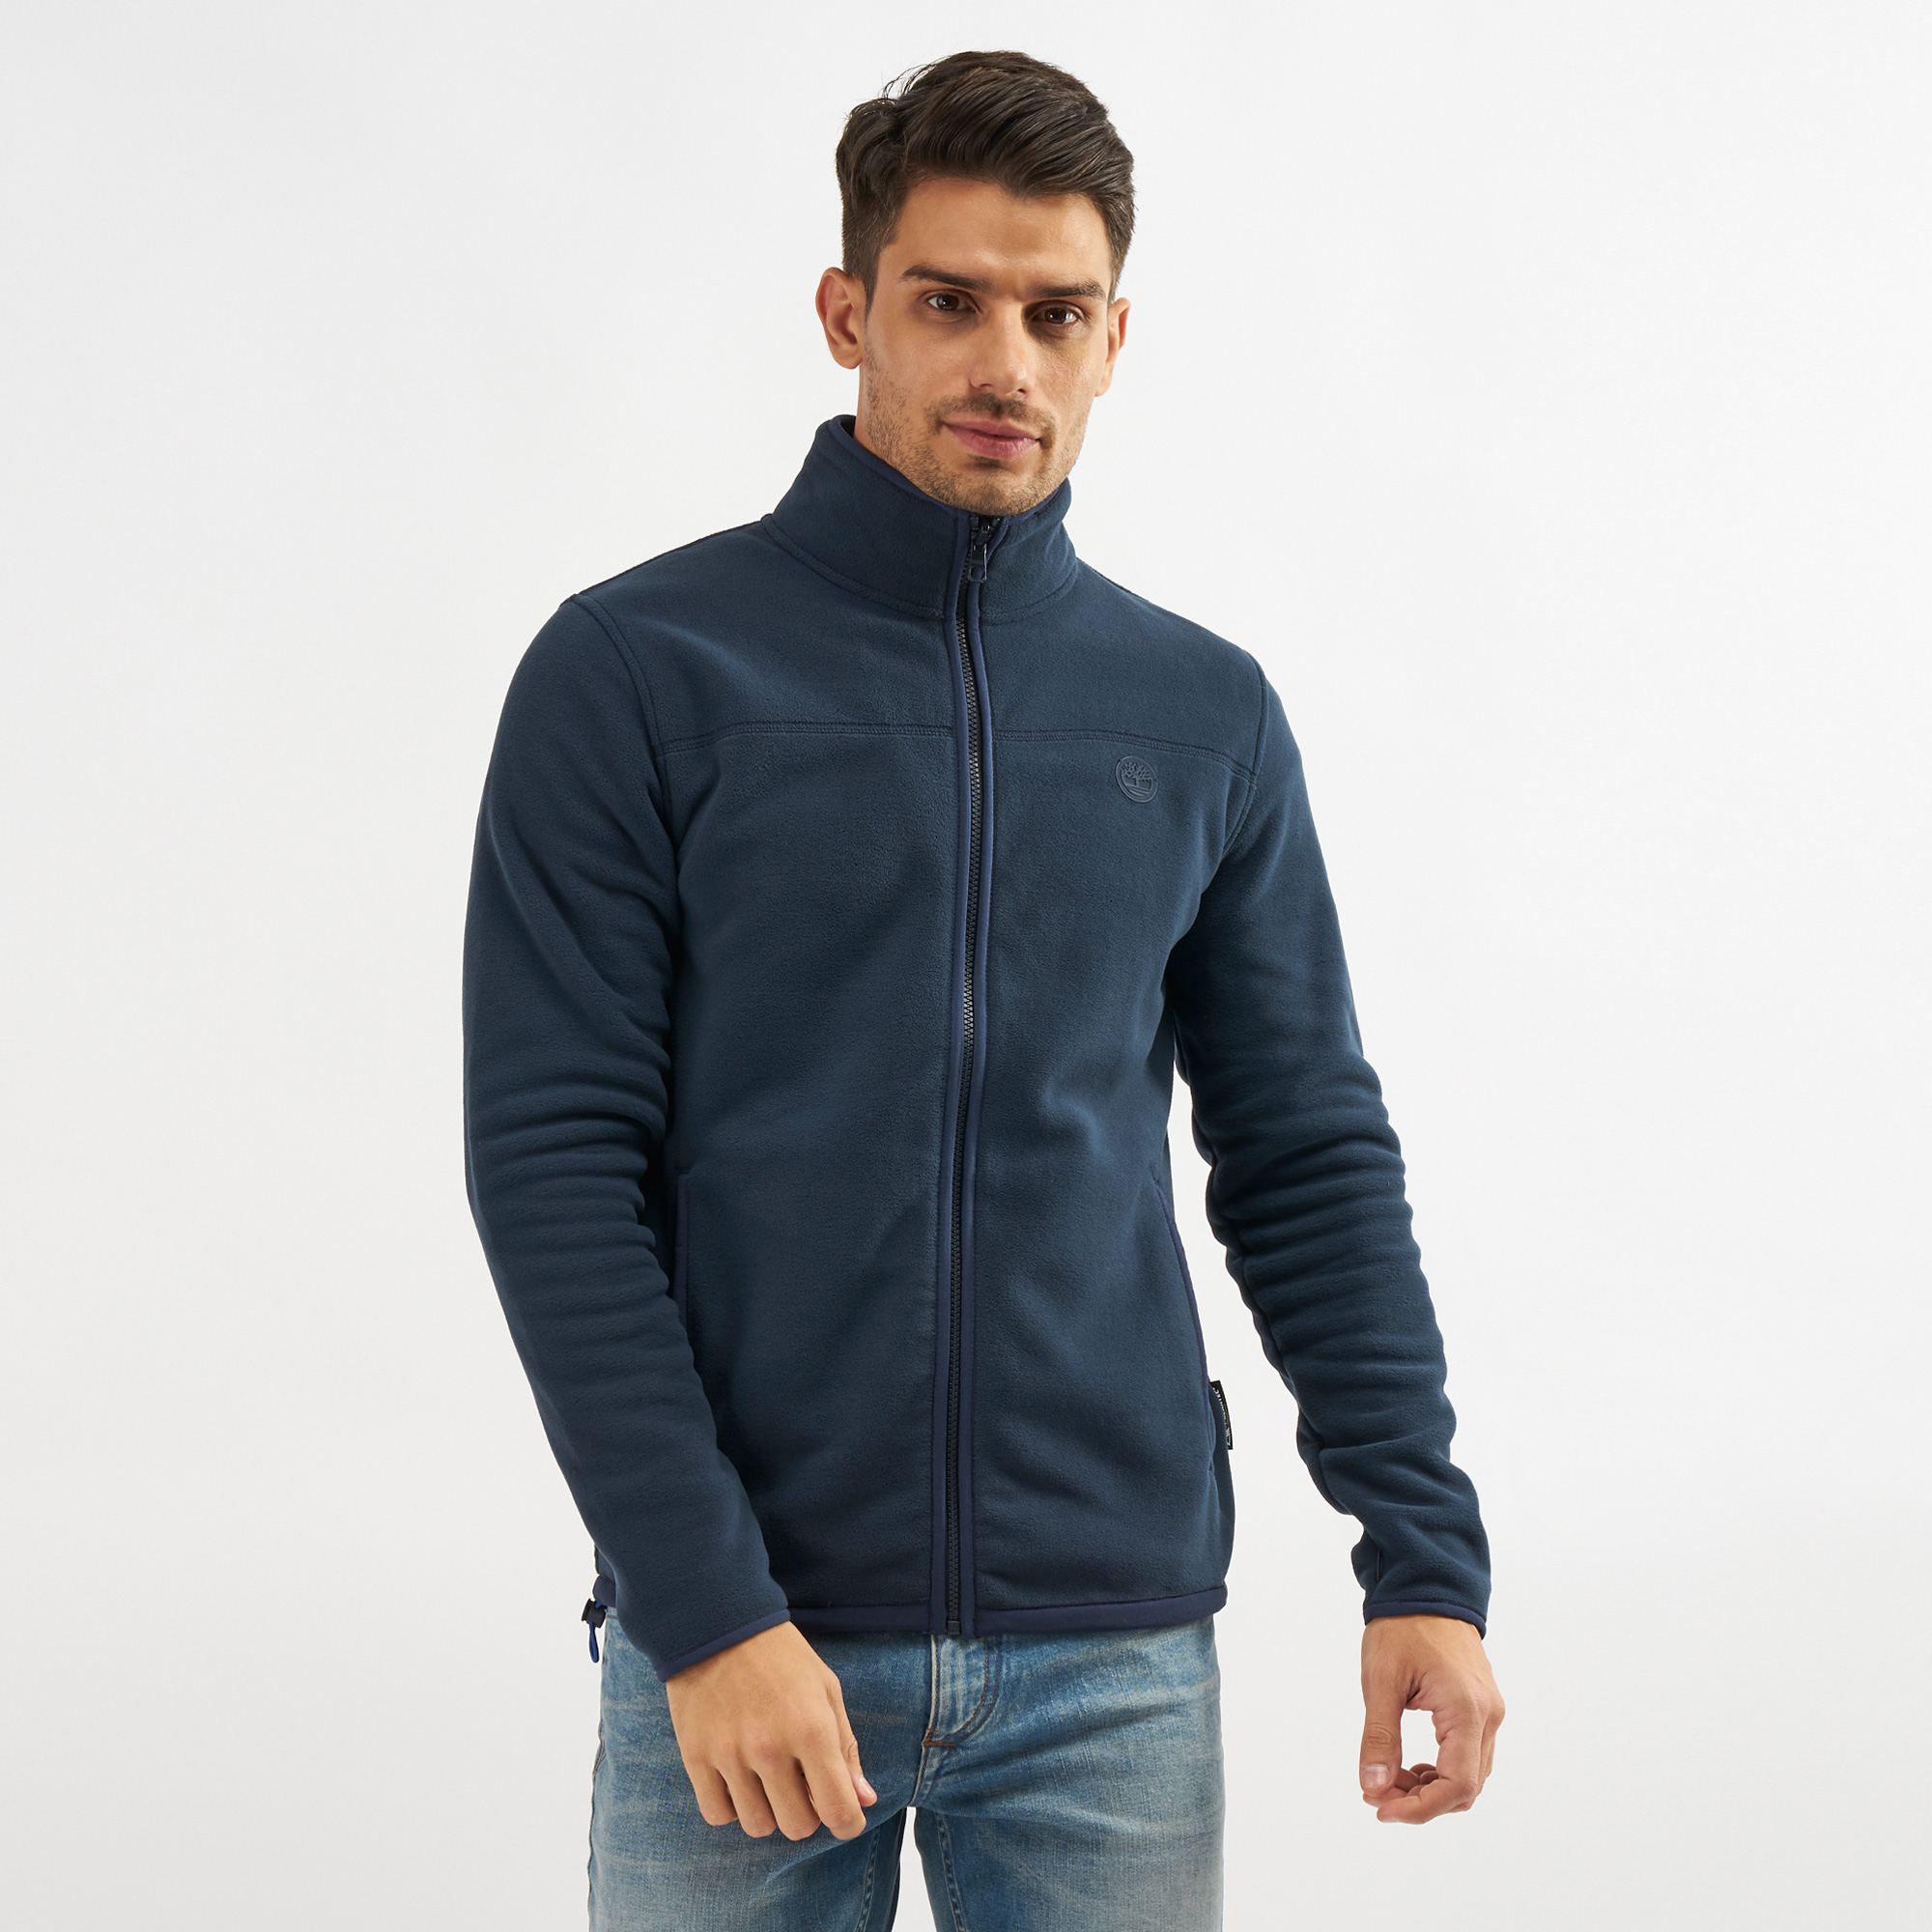 timberland compatible layering system fleece